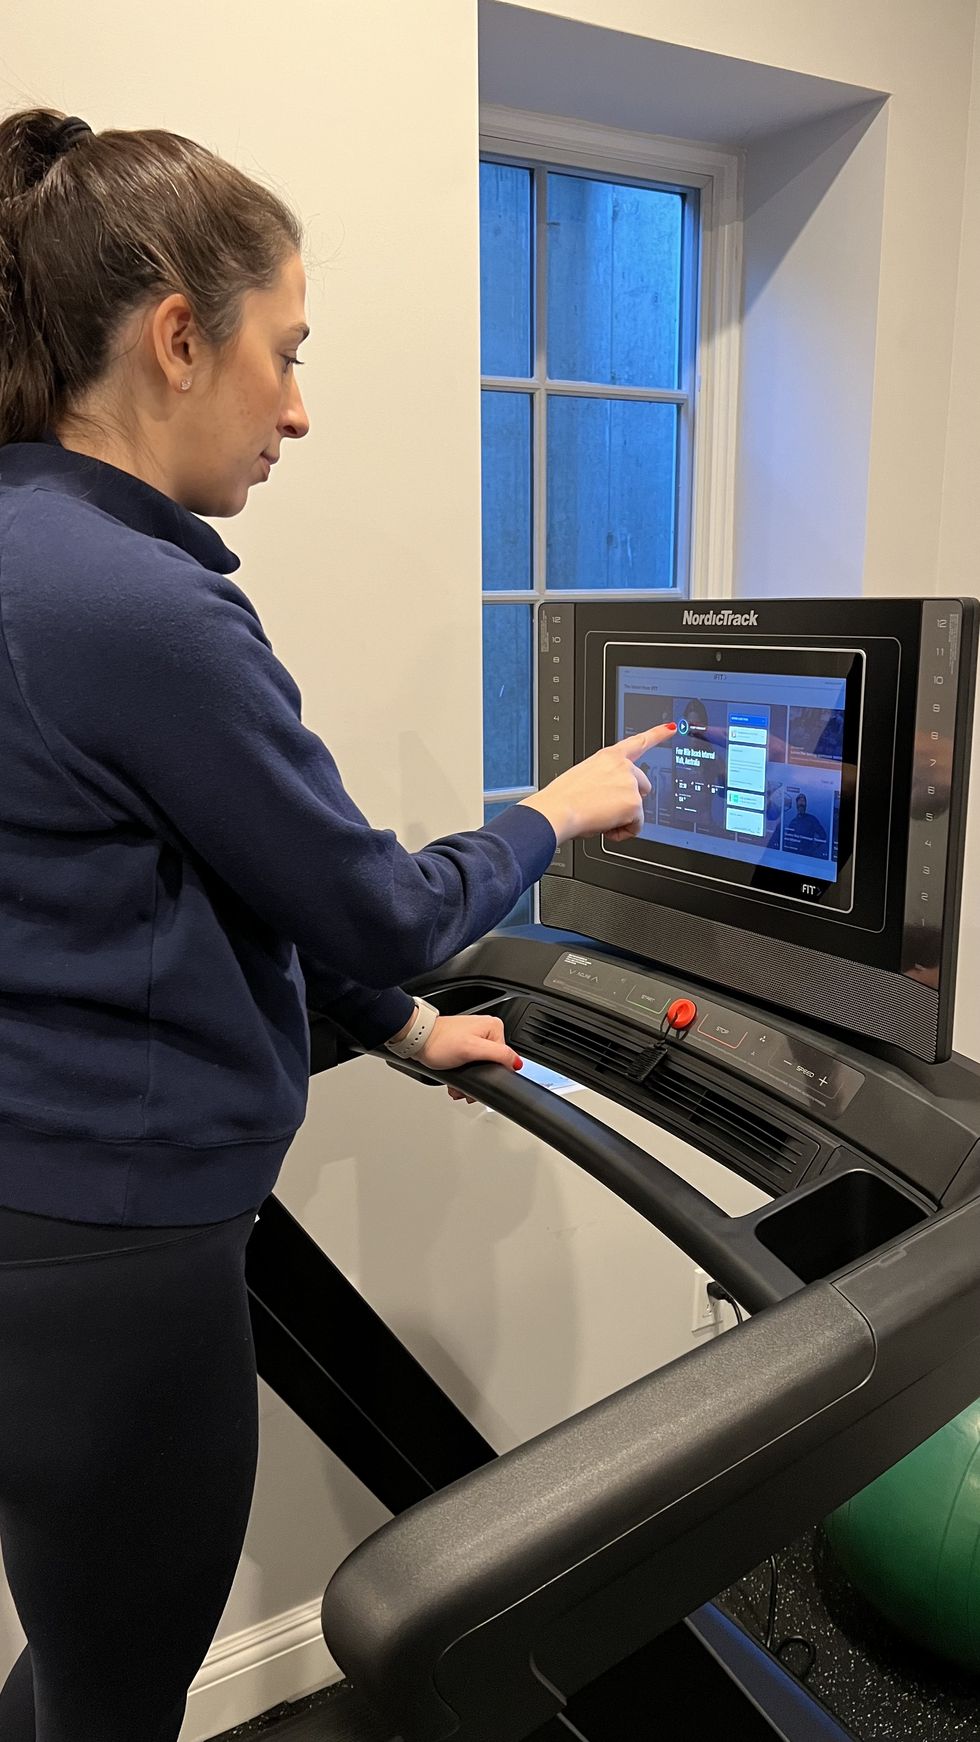 sassos using the nordictrack 1750 commercial treadmill